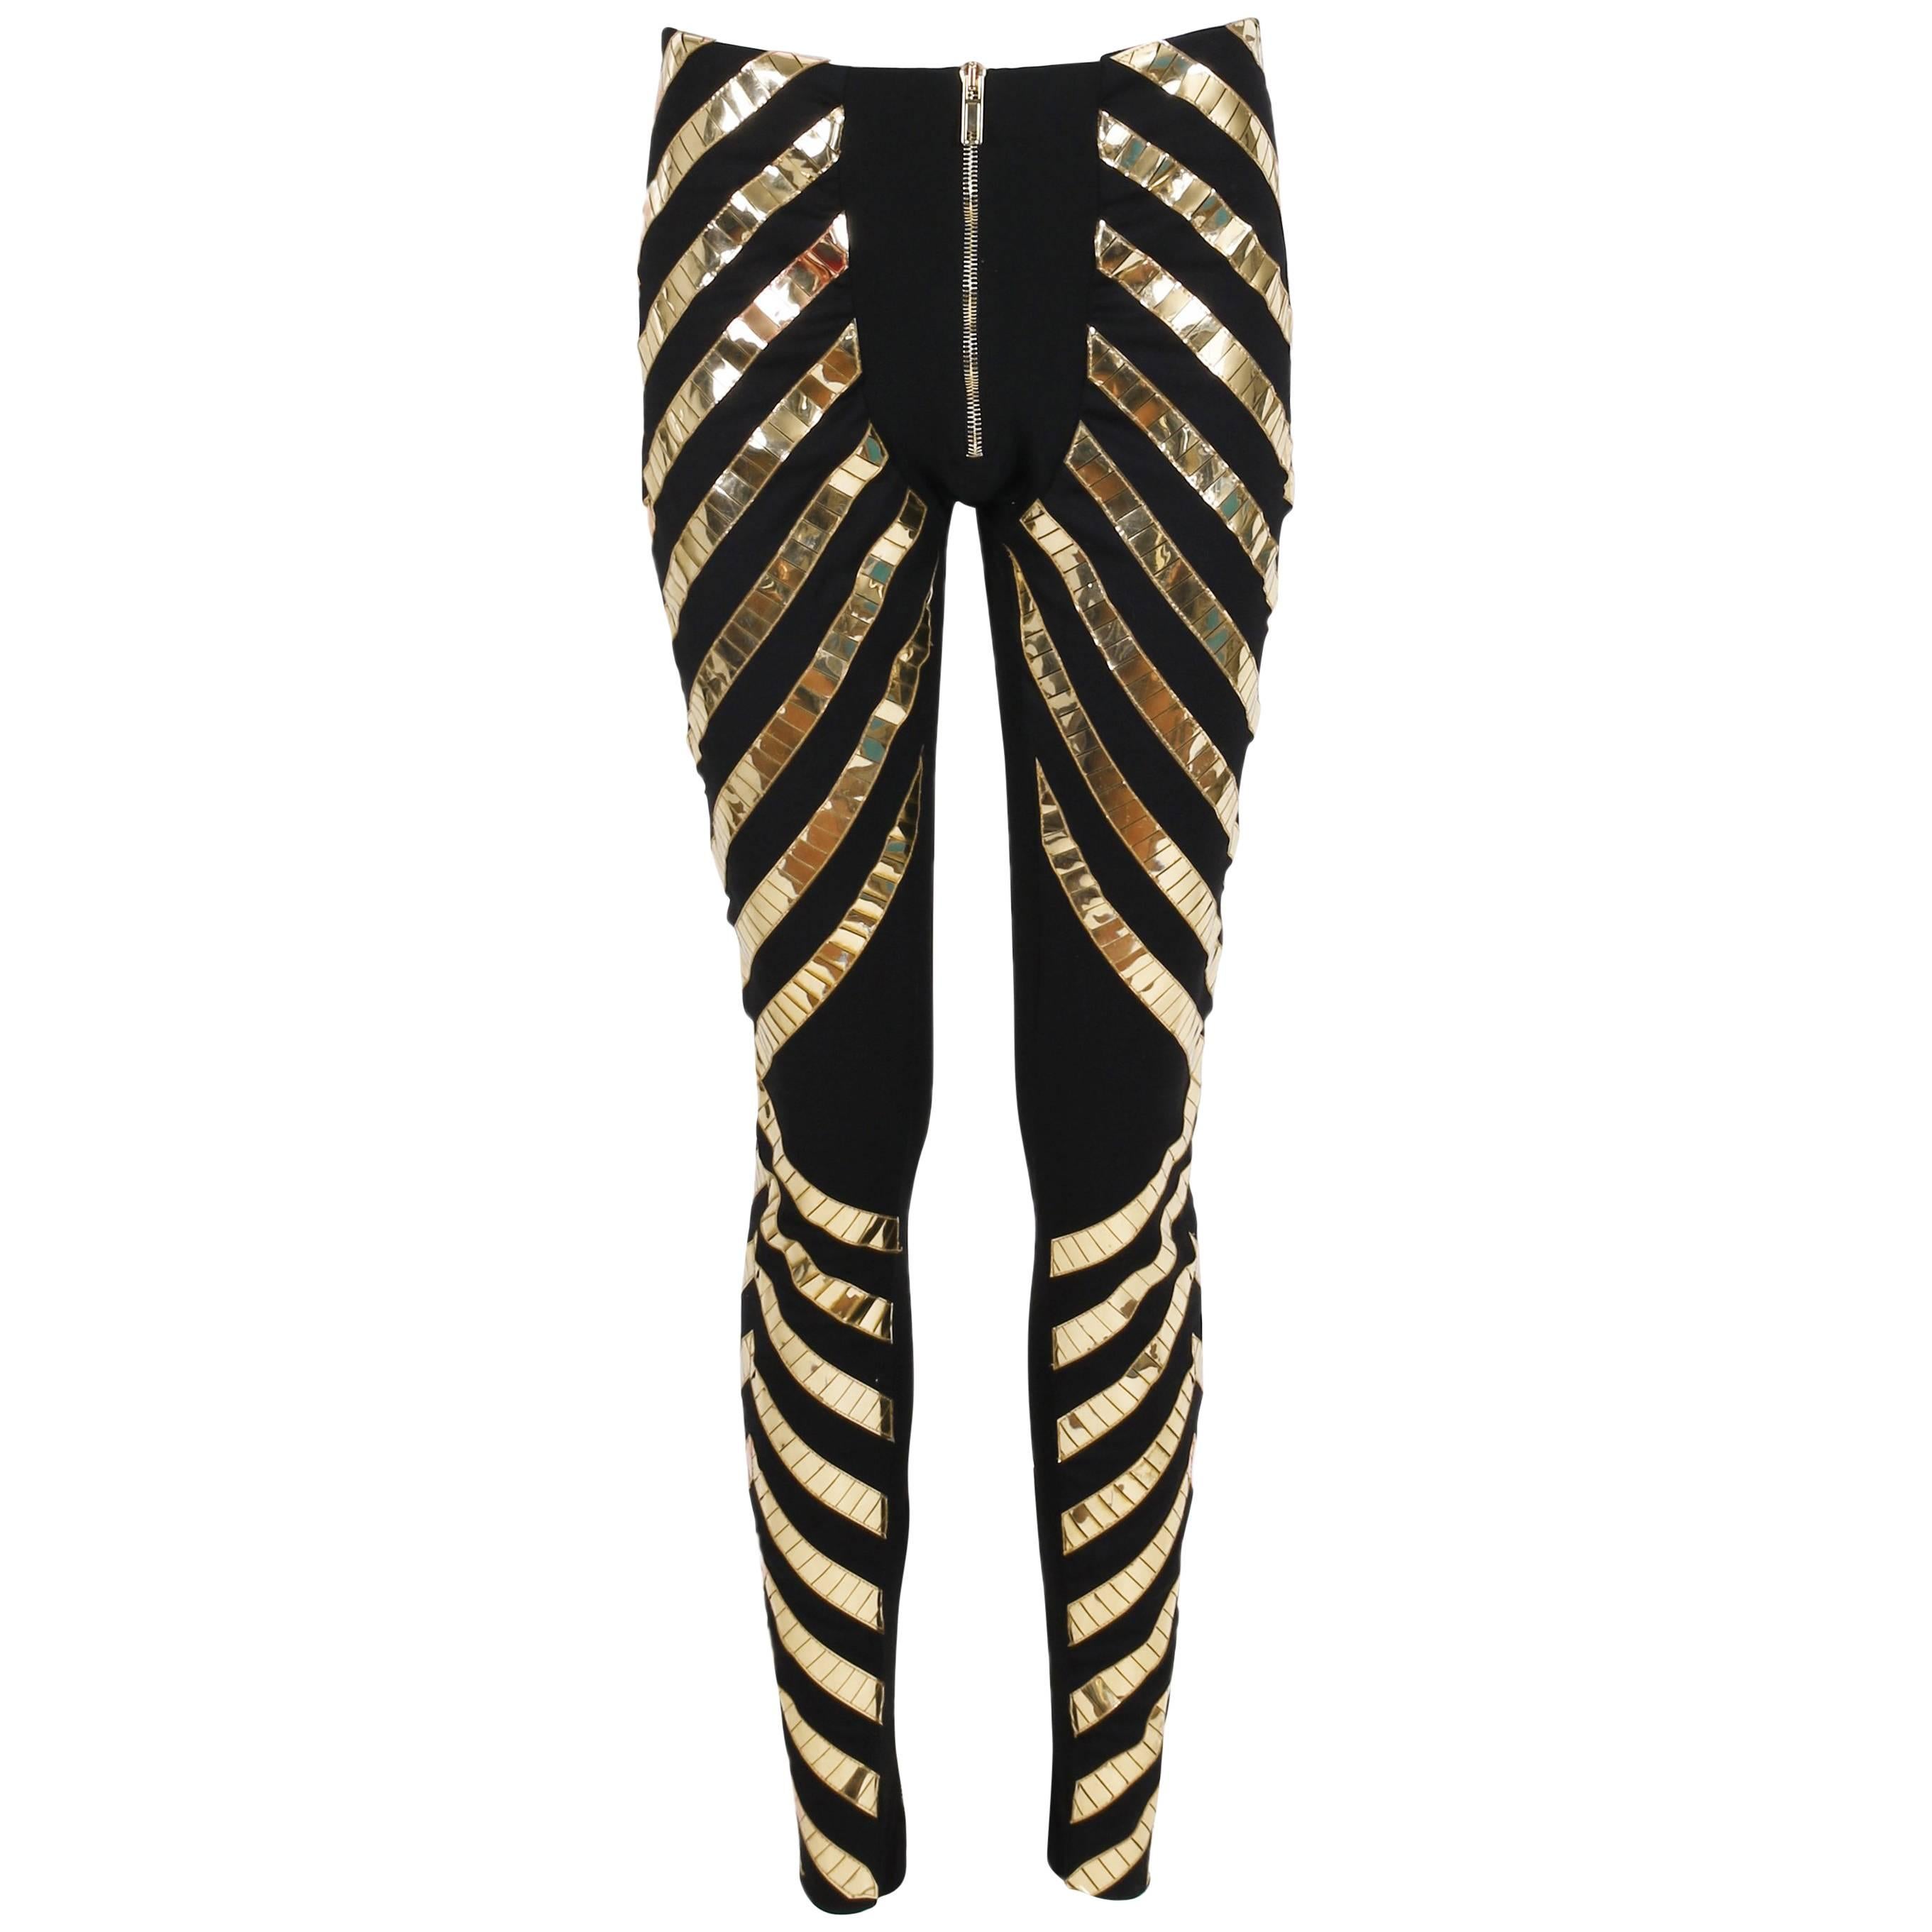 2011 Gareth Pugh Gold and Black Stretch Pants with Zippers at Ankle